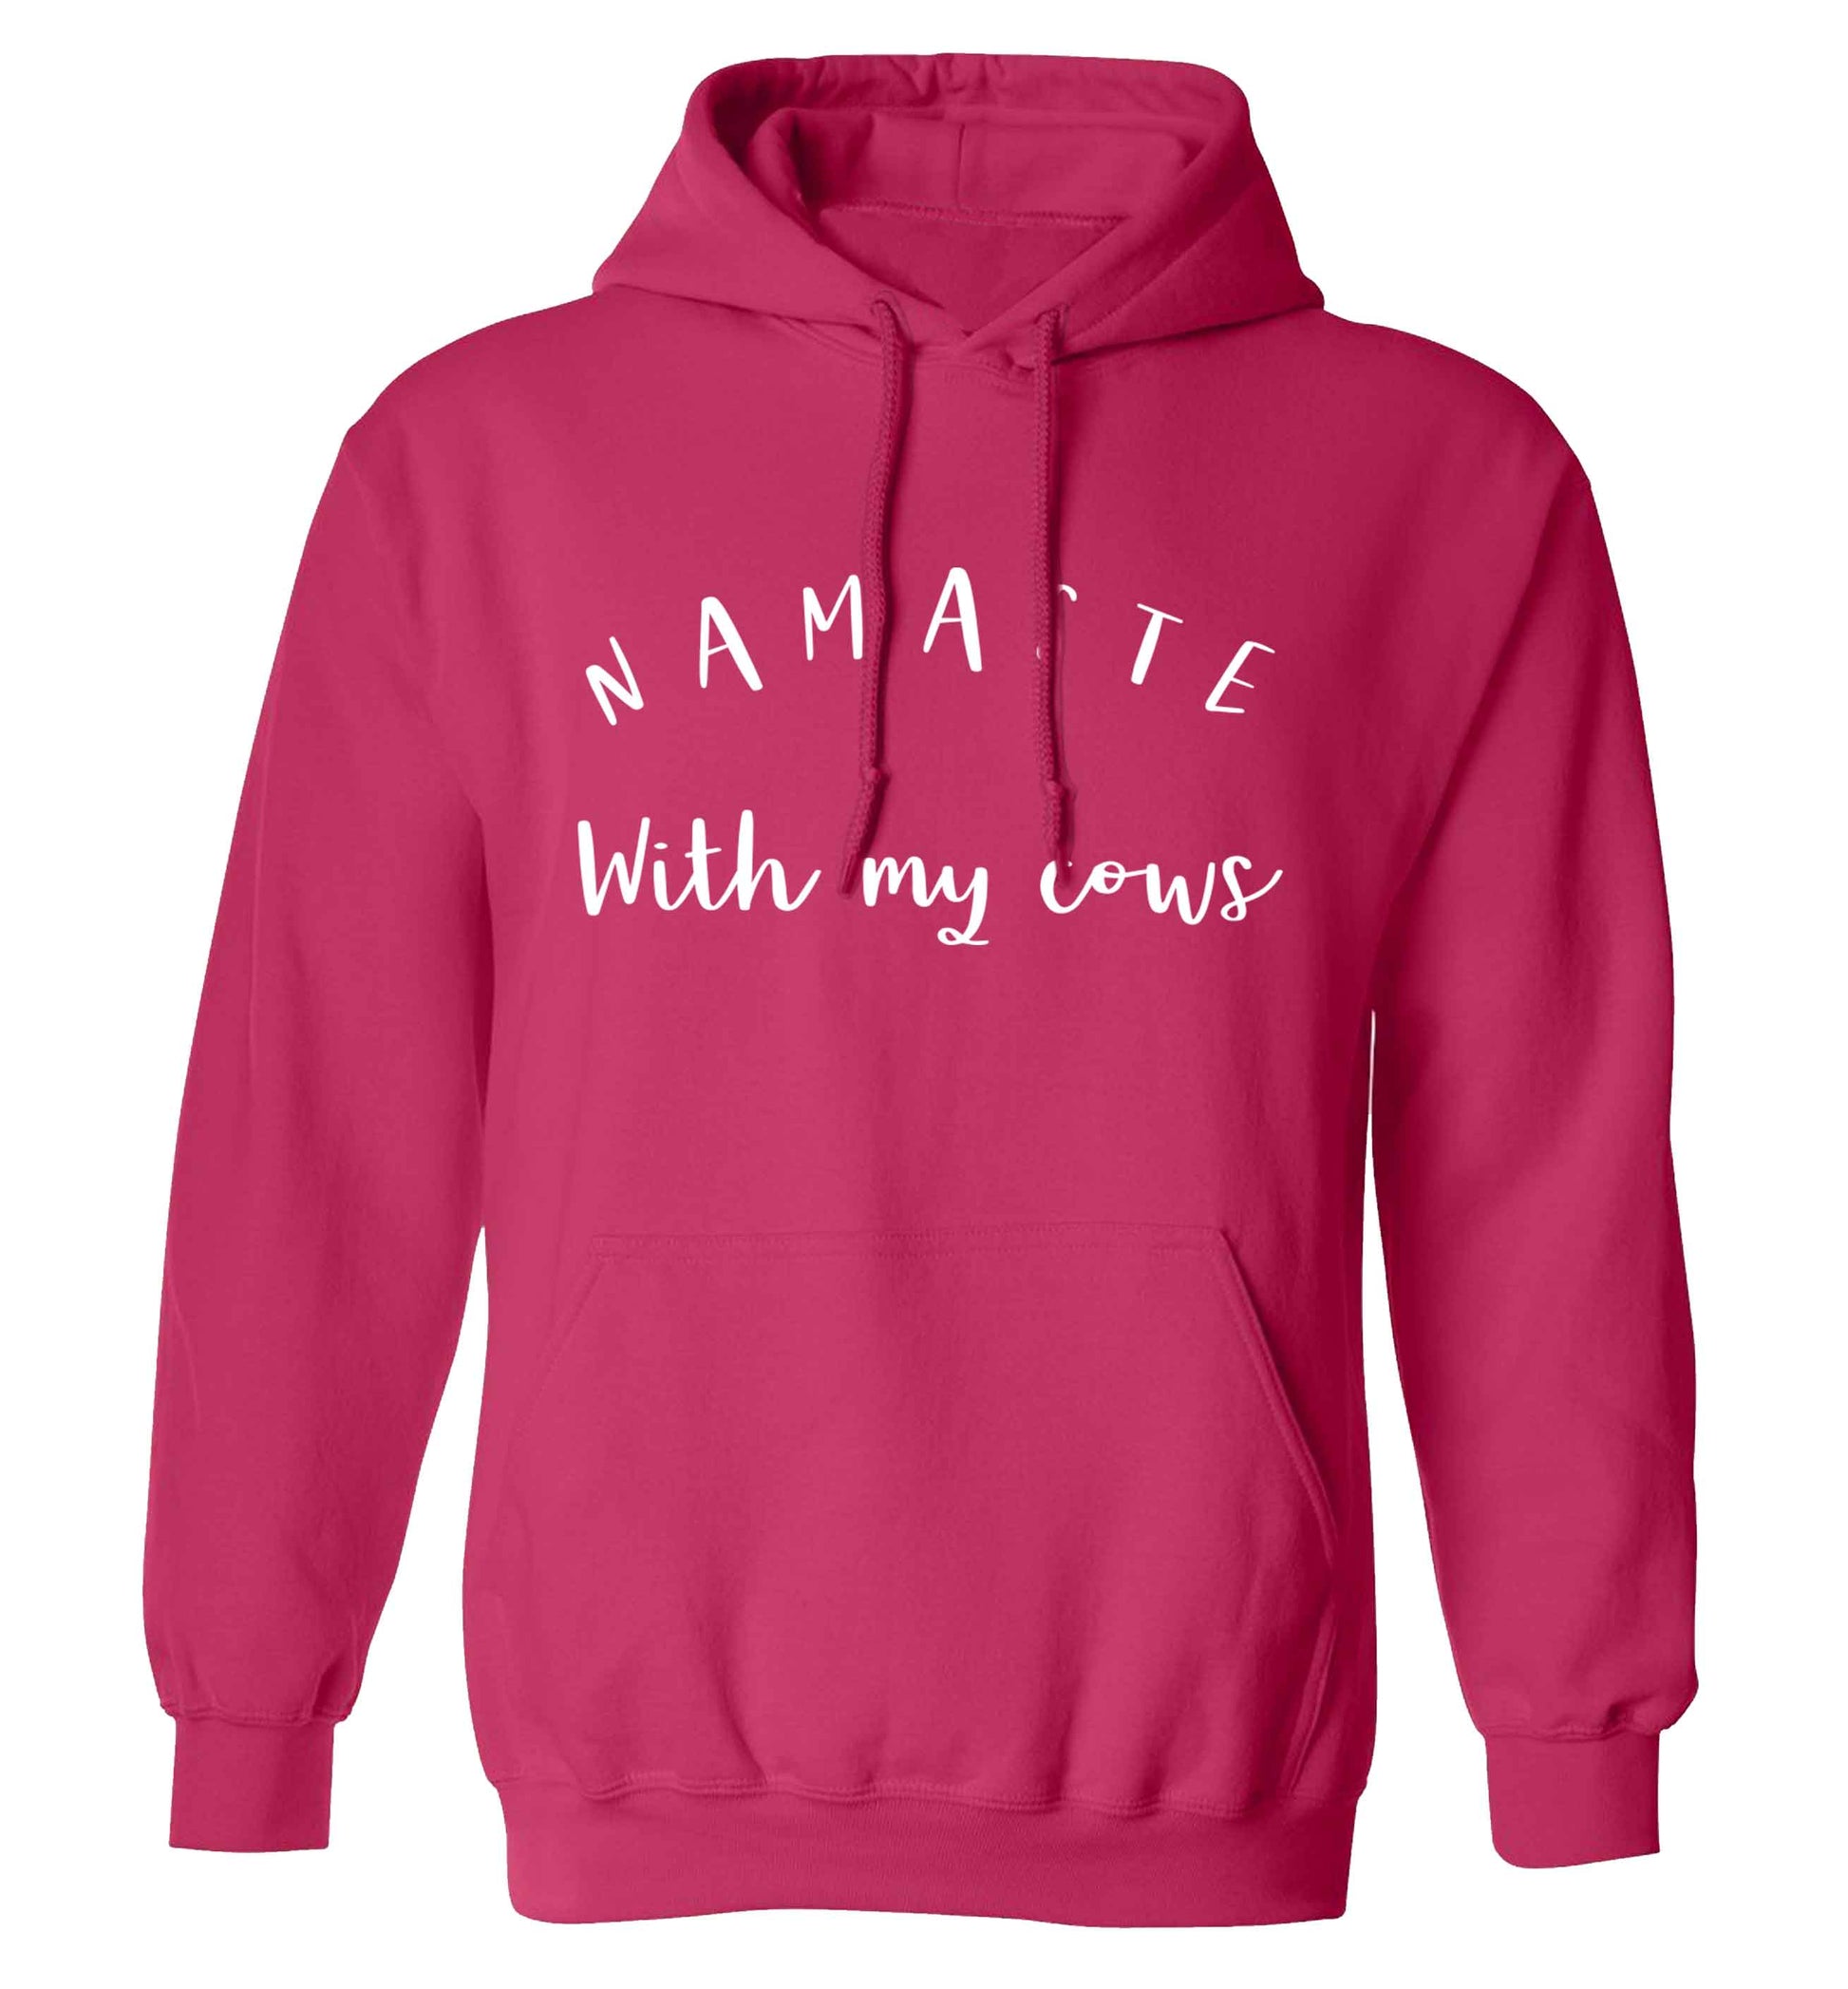 Namaste with my cows adults unisex pink hoodie 2XL